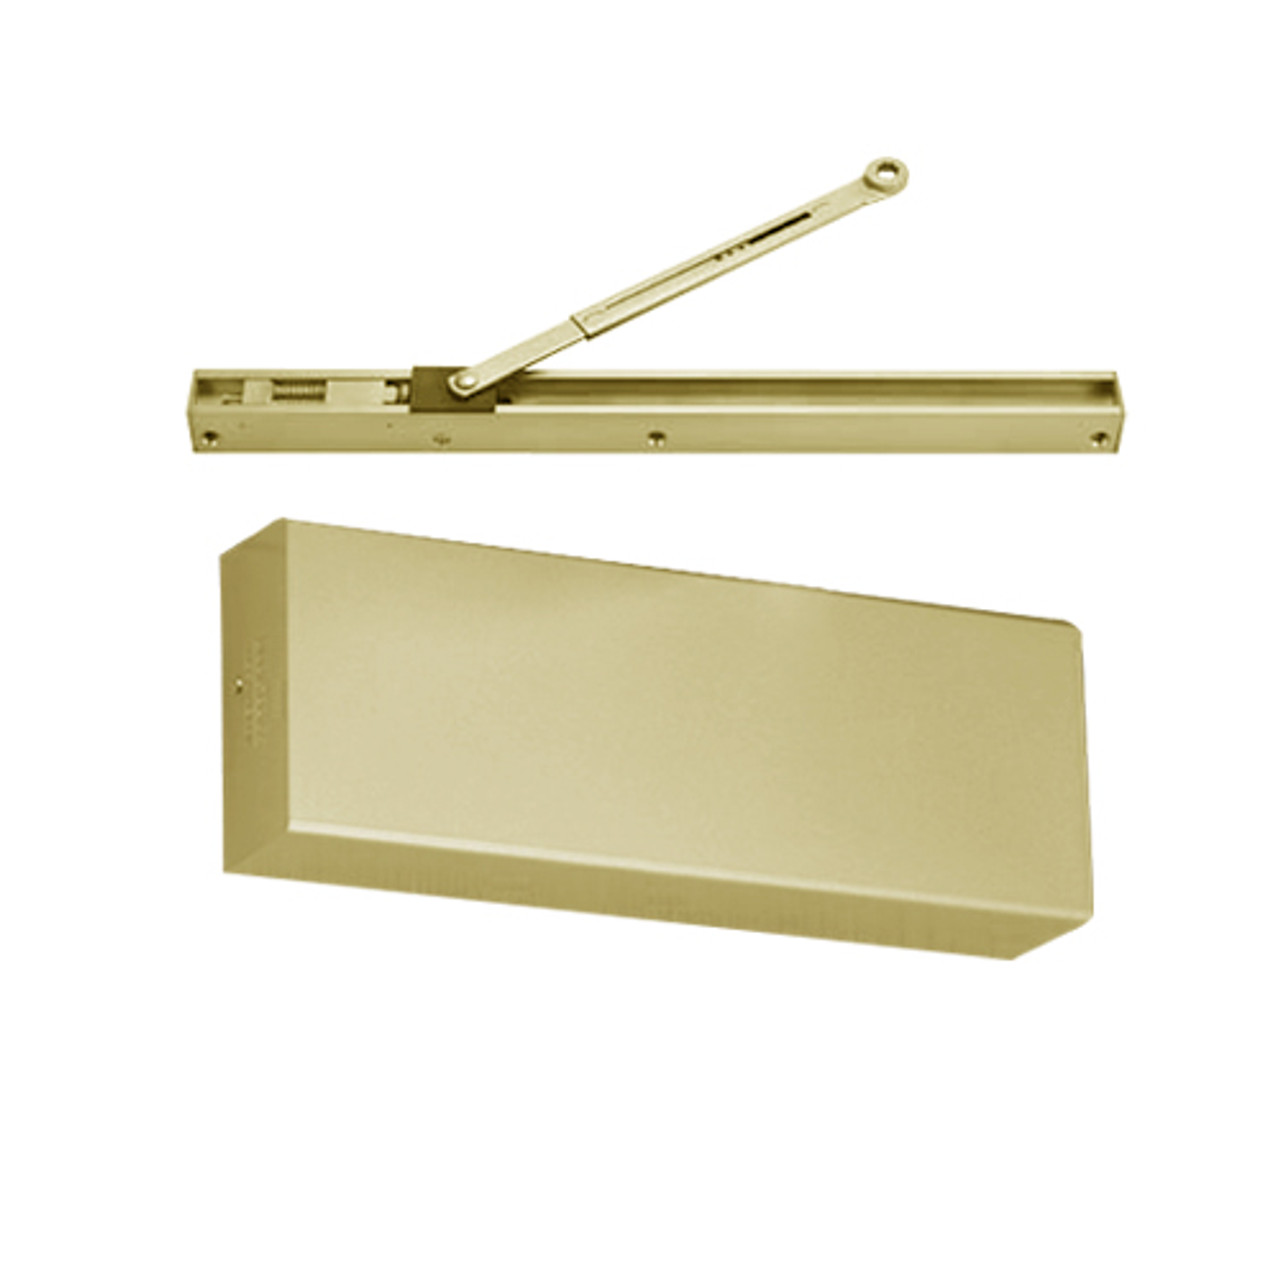 9500STDA-696 Norton 9500 Series Non-Hold Open Cast Iron Door Closer with Pull Side Slide Track in Gold Finish